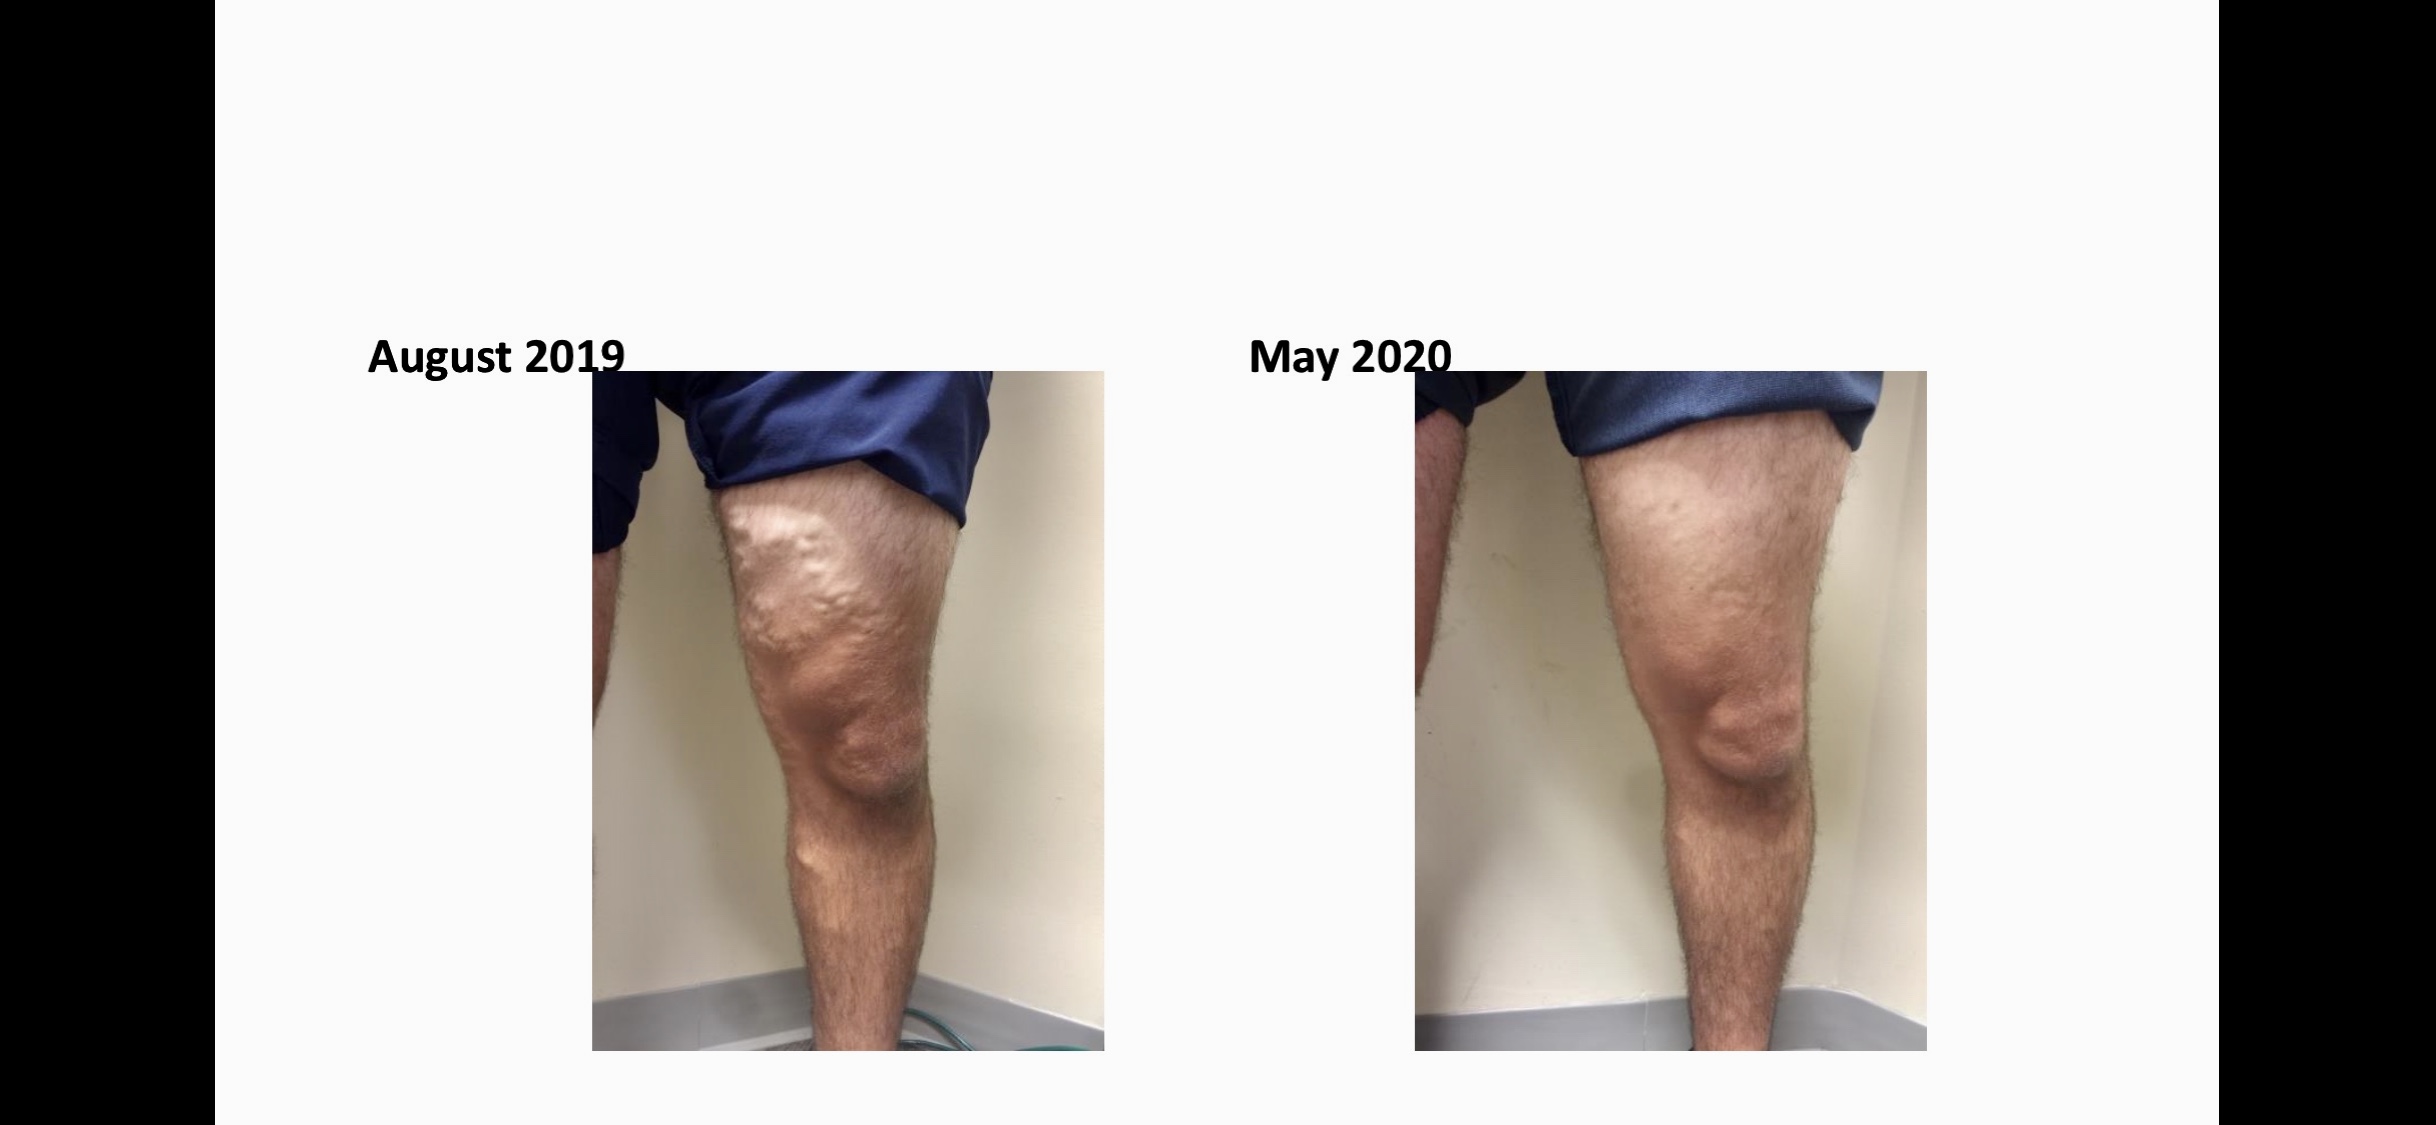 This patient was seen in 2019 with large varicosities. They underwent radiofrequency ablation in late 2019. Radiofrequency ablation is a minimally-invasive option that heats and damages the inner walls of your varicose veins, causing scar tissue to form in the vein. This closes off the vein and results in blood flow redirecting to healthy veins, allowing the body to gradually absorb the varicose vein so it fades from view. The After photos were taken six weeks after treatment on saphenous veins and varicose veins. 
    The patient is very happy! 
    